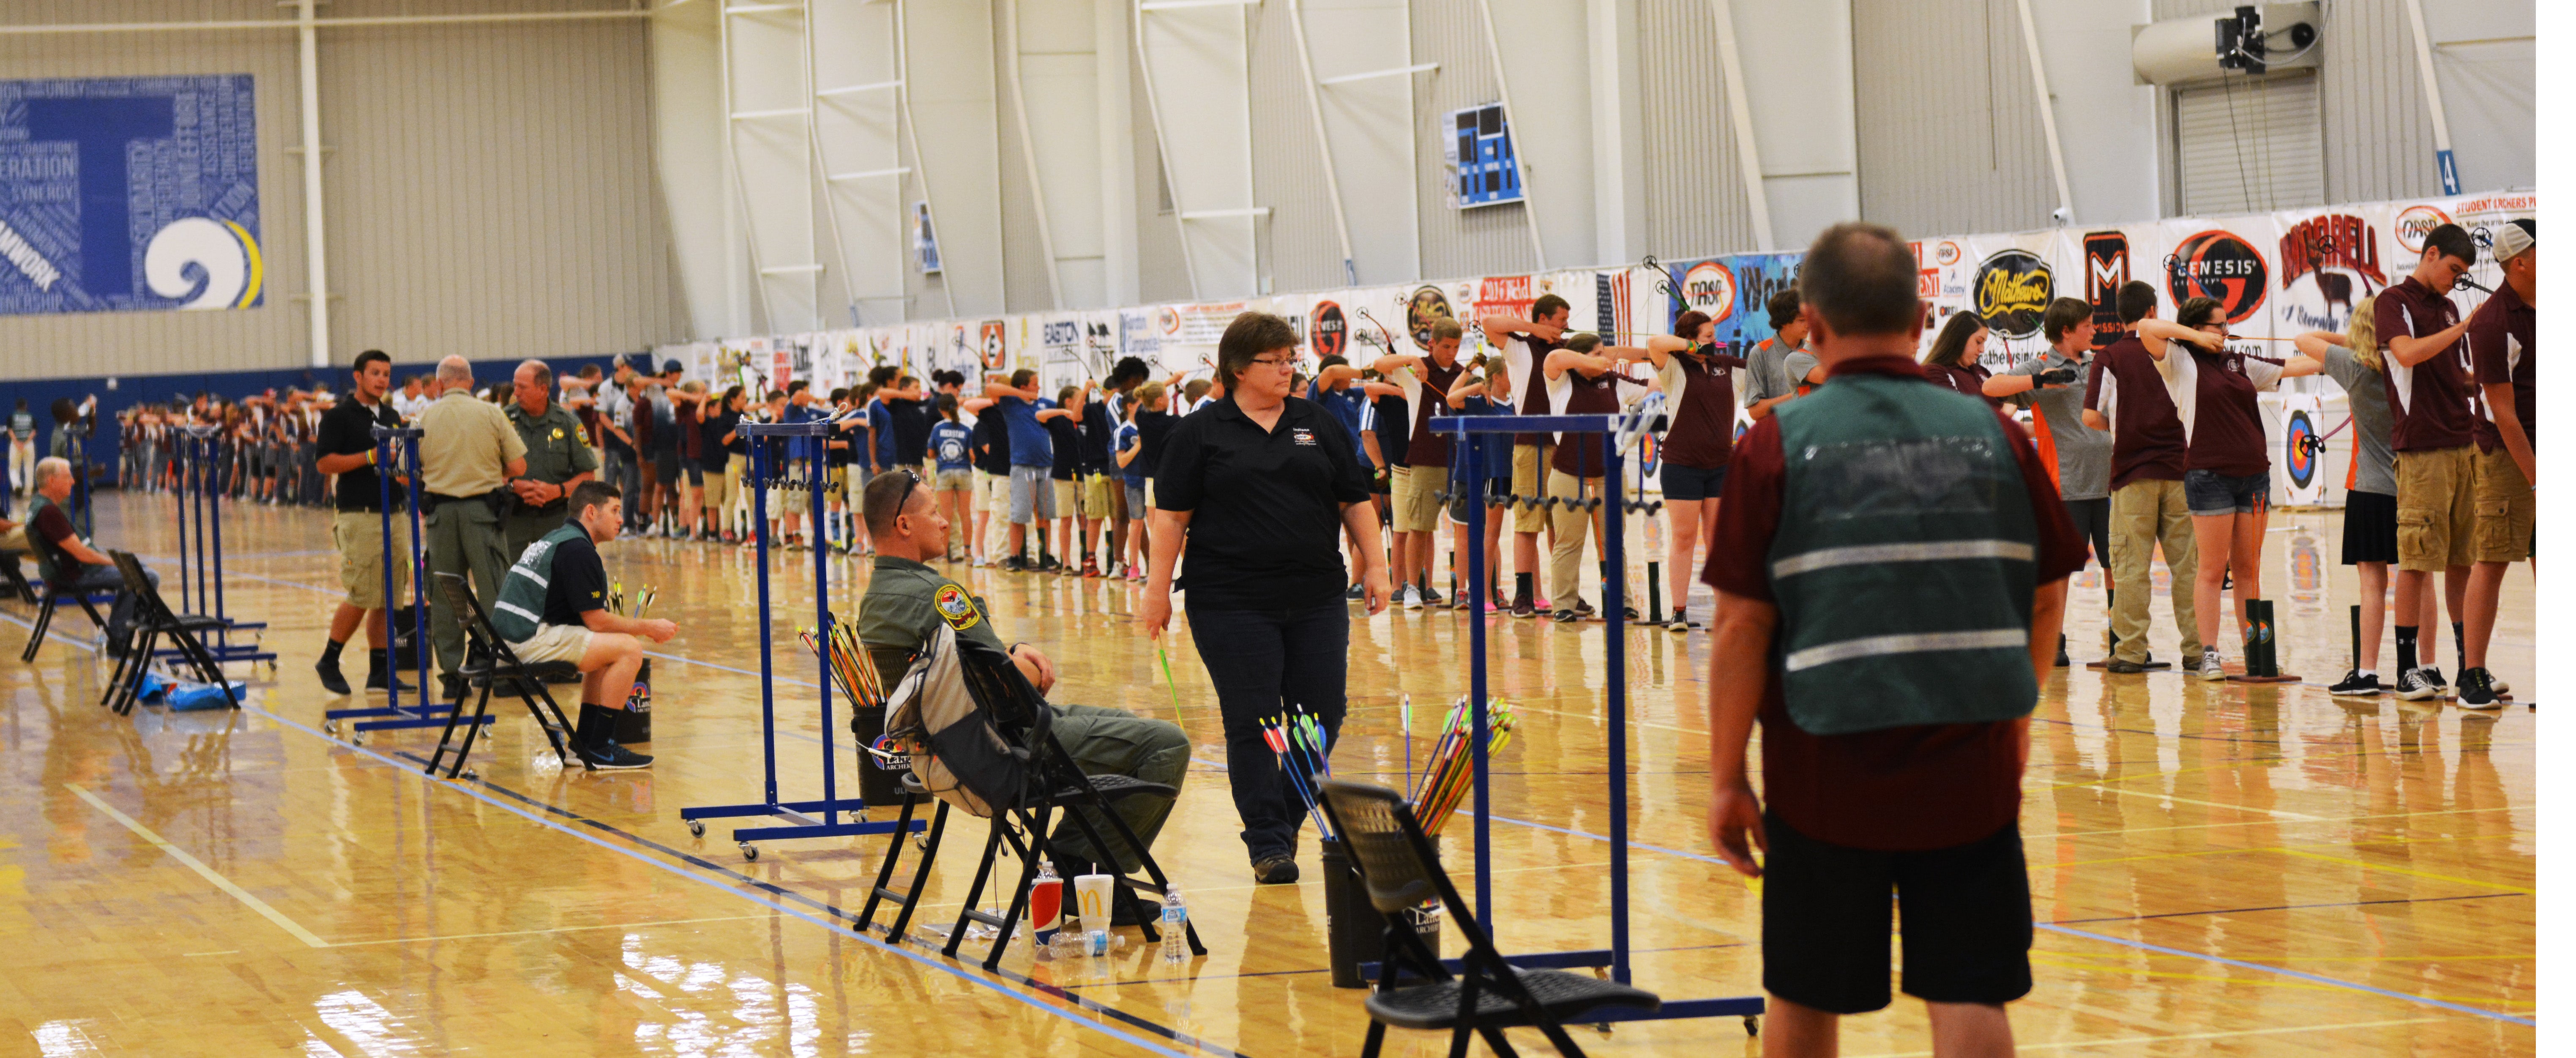 Students shooting their bows during the NASP World Archery Tournament